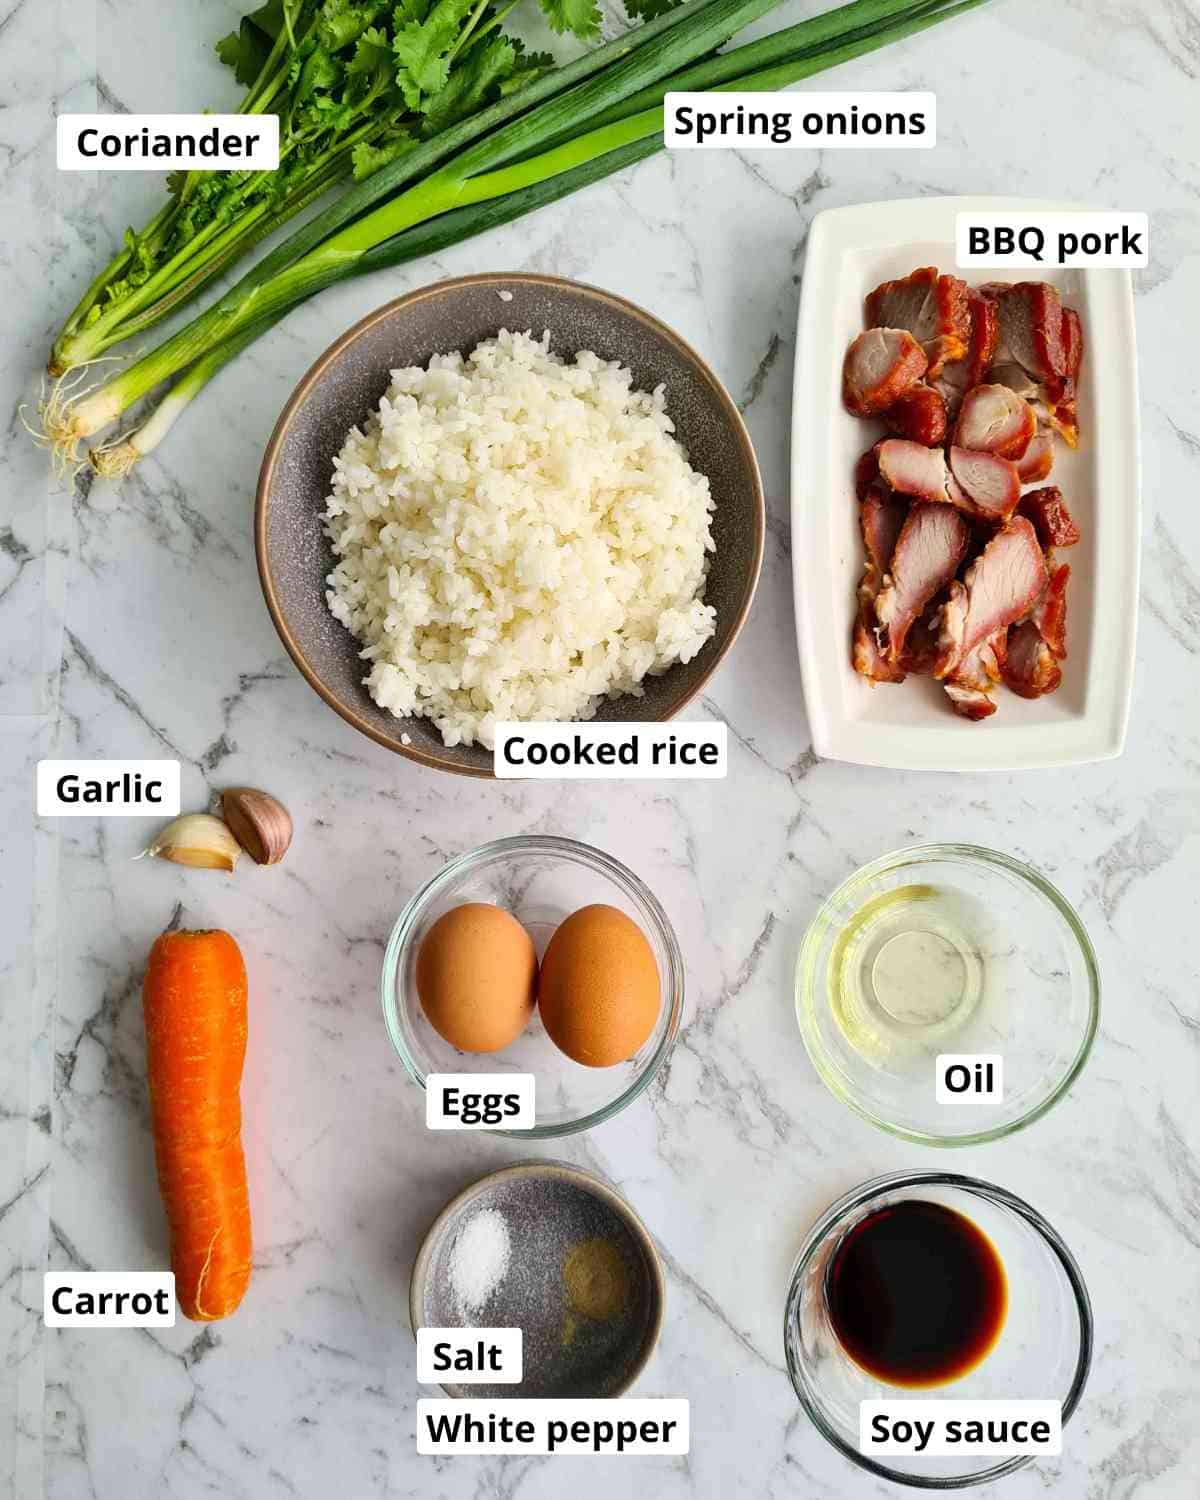 Ingredients required to make Chinese BBQ pork fried rice, each item labeled